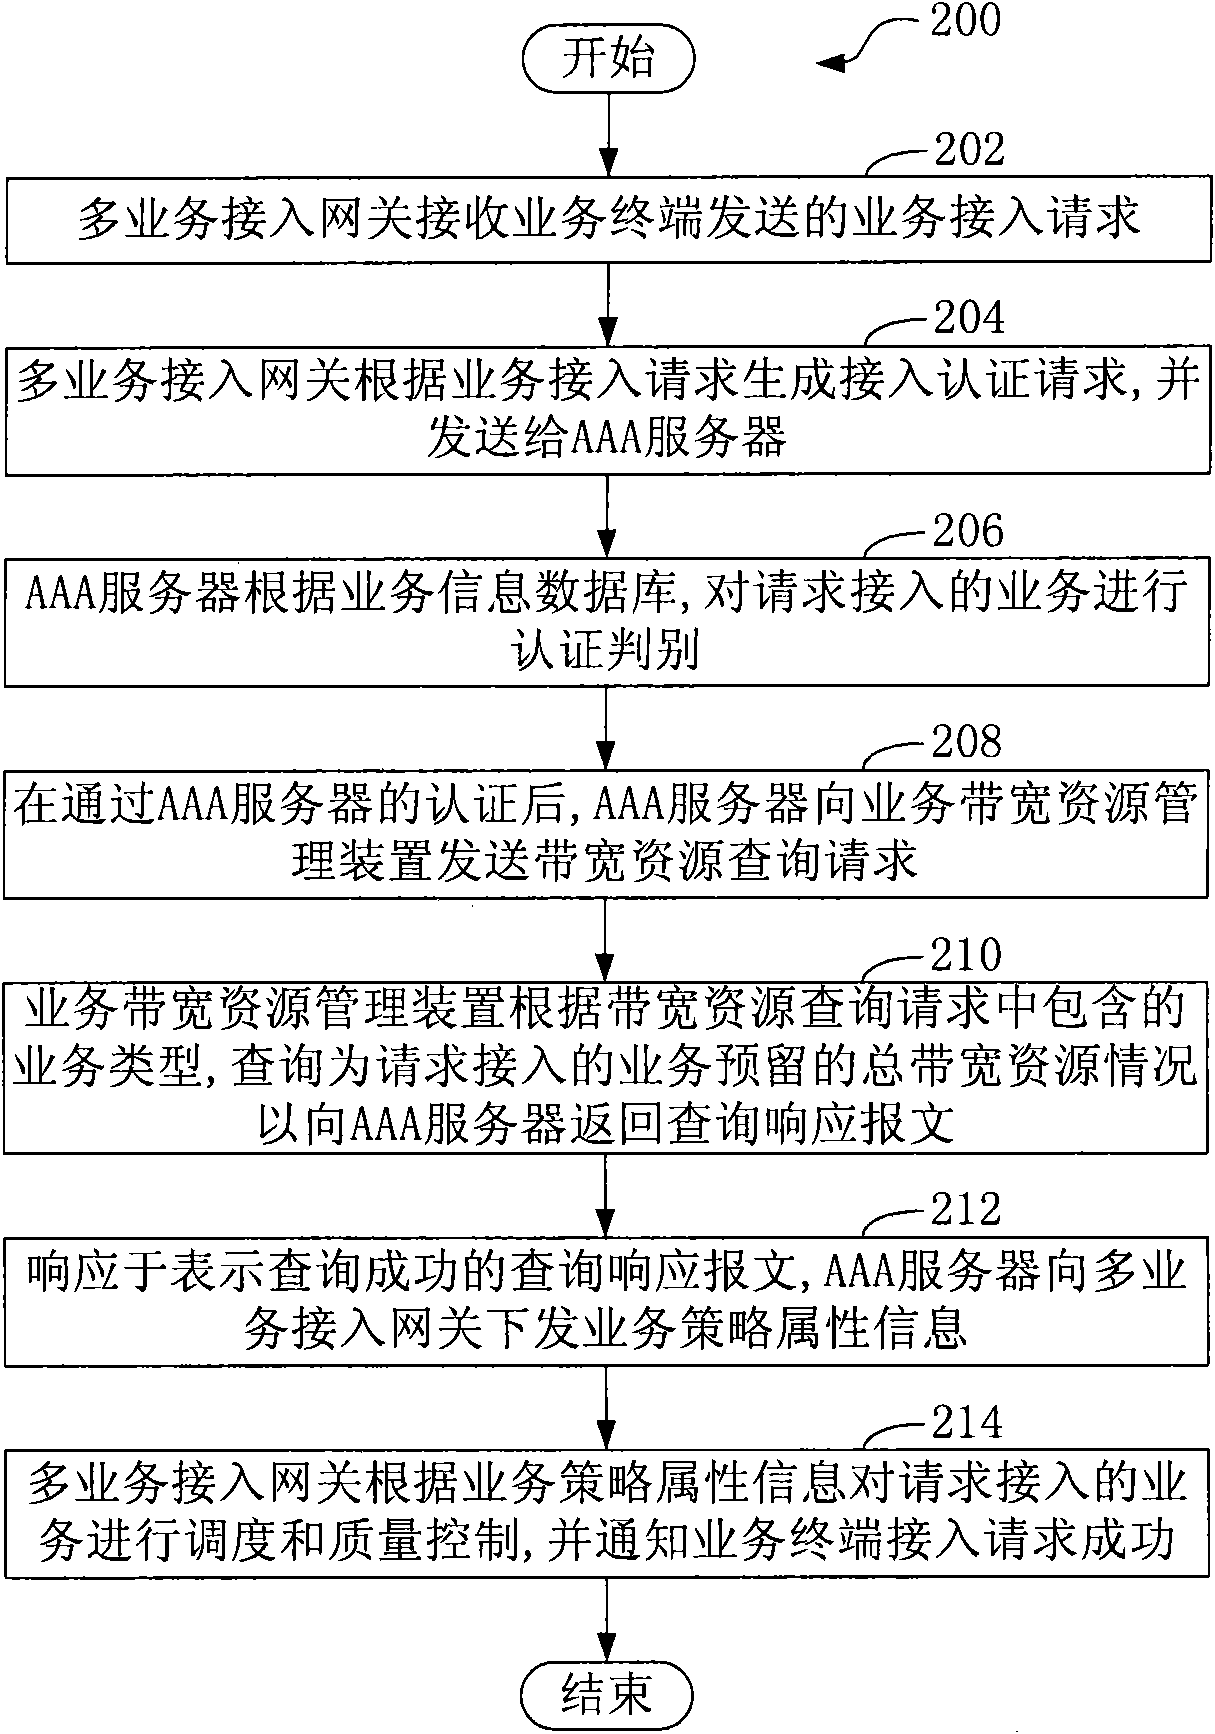 Method and system for controlling quality of multi-service portfolio